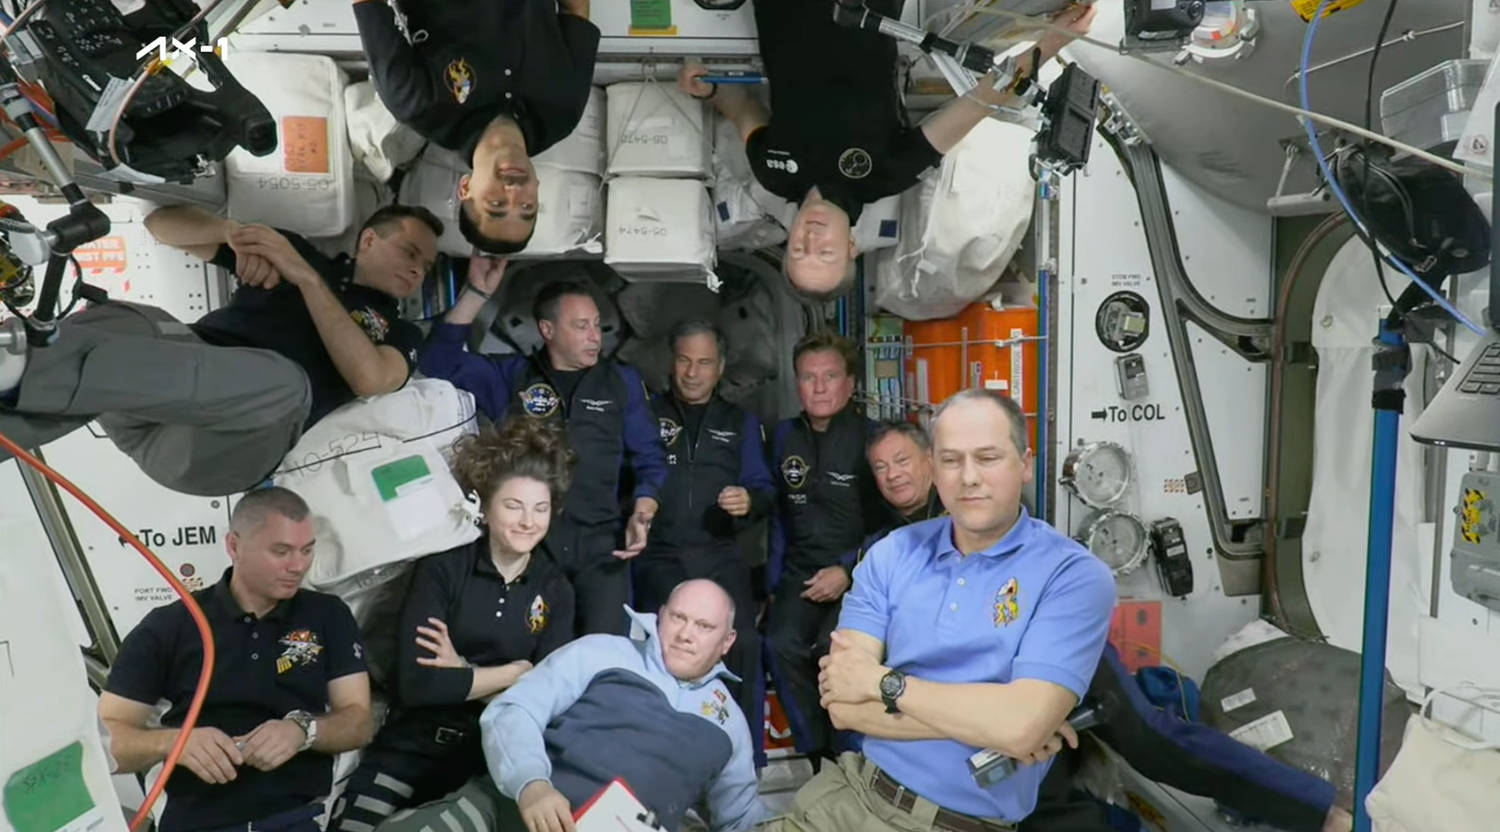 Things have gotten a little crowded onboard the ISS with the arrival of the first all-private astronaut team. (Photo: Axiom)